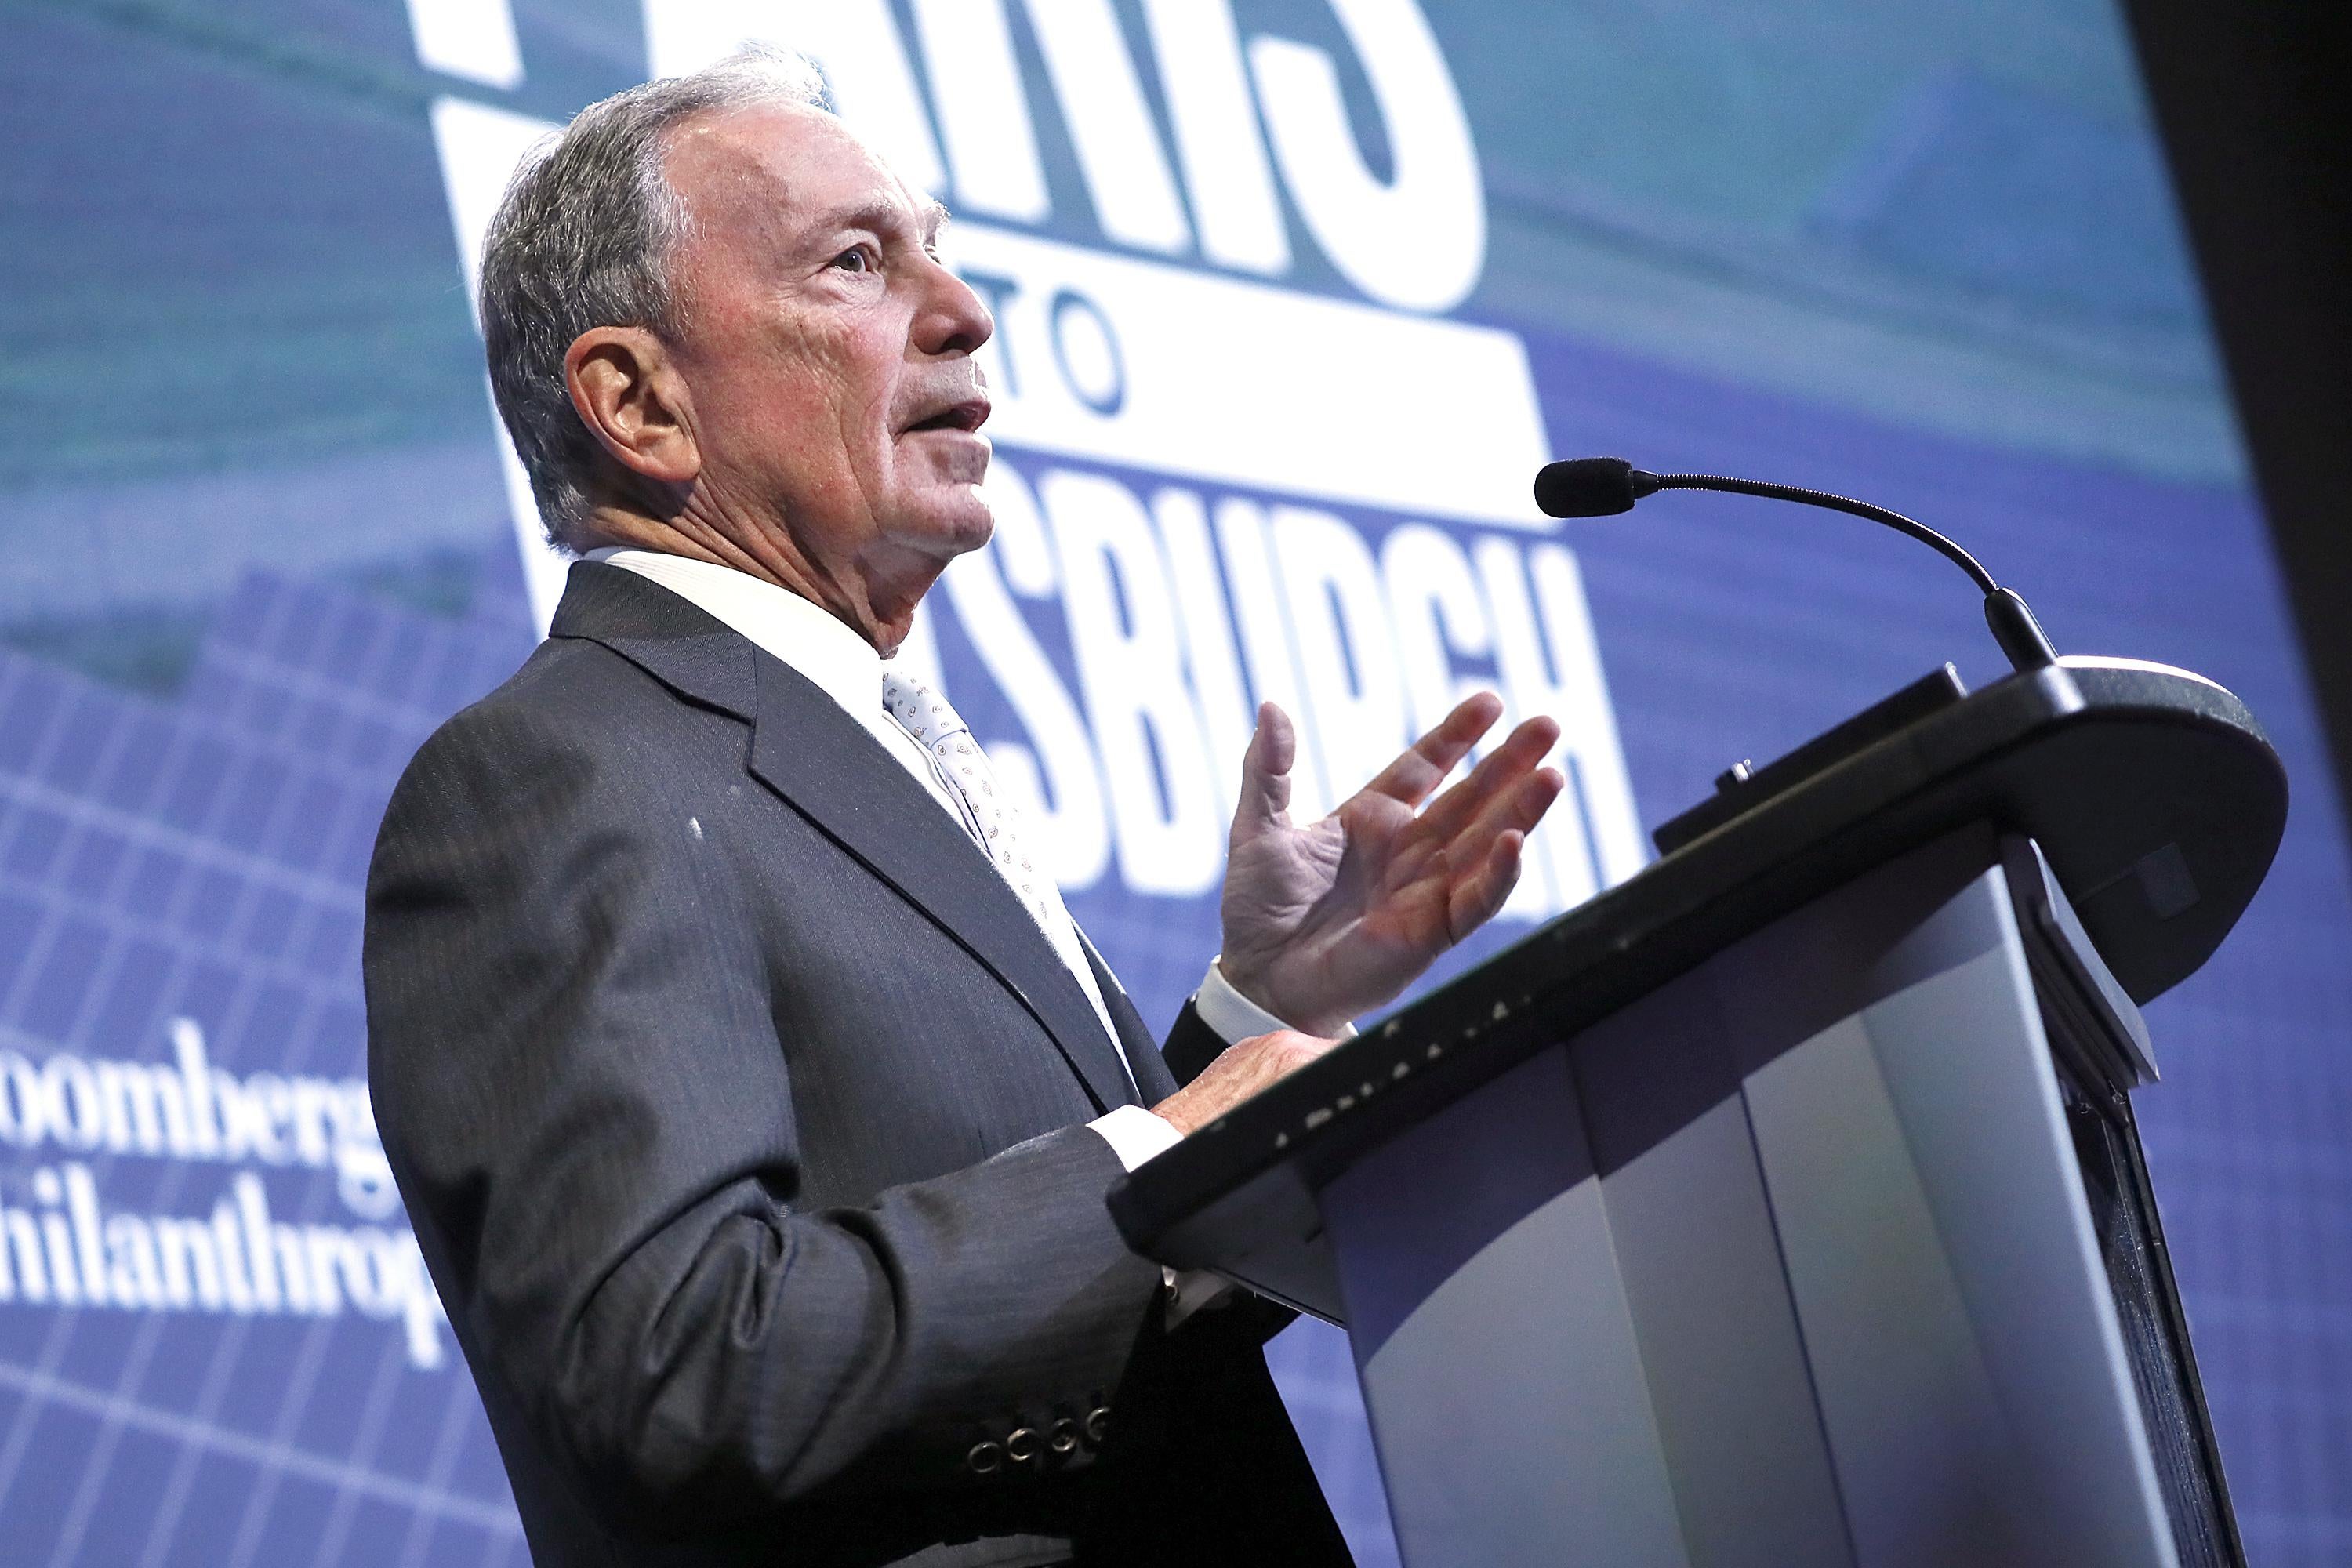 Michael Bloomberg speaks at a film screening hosted by Bloomberg Philanthropies and National Geographic.